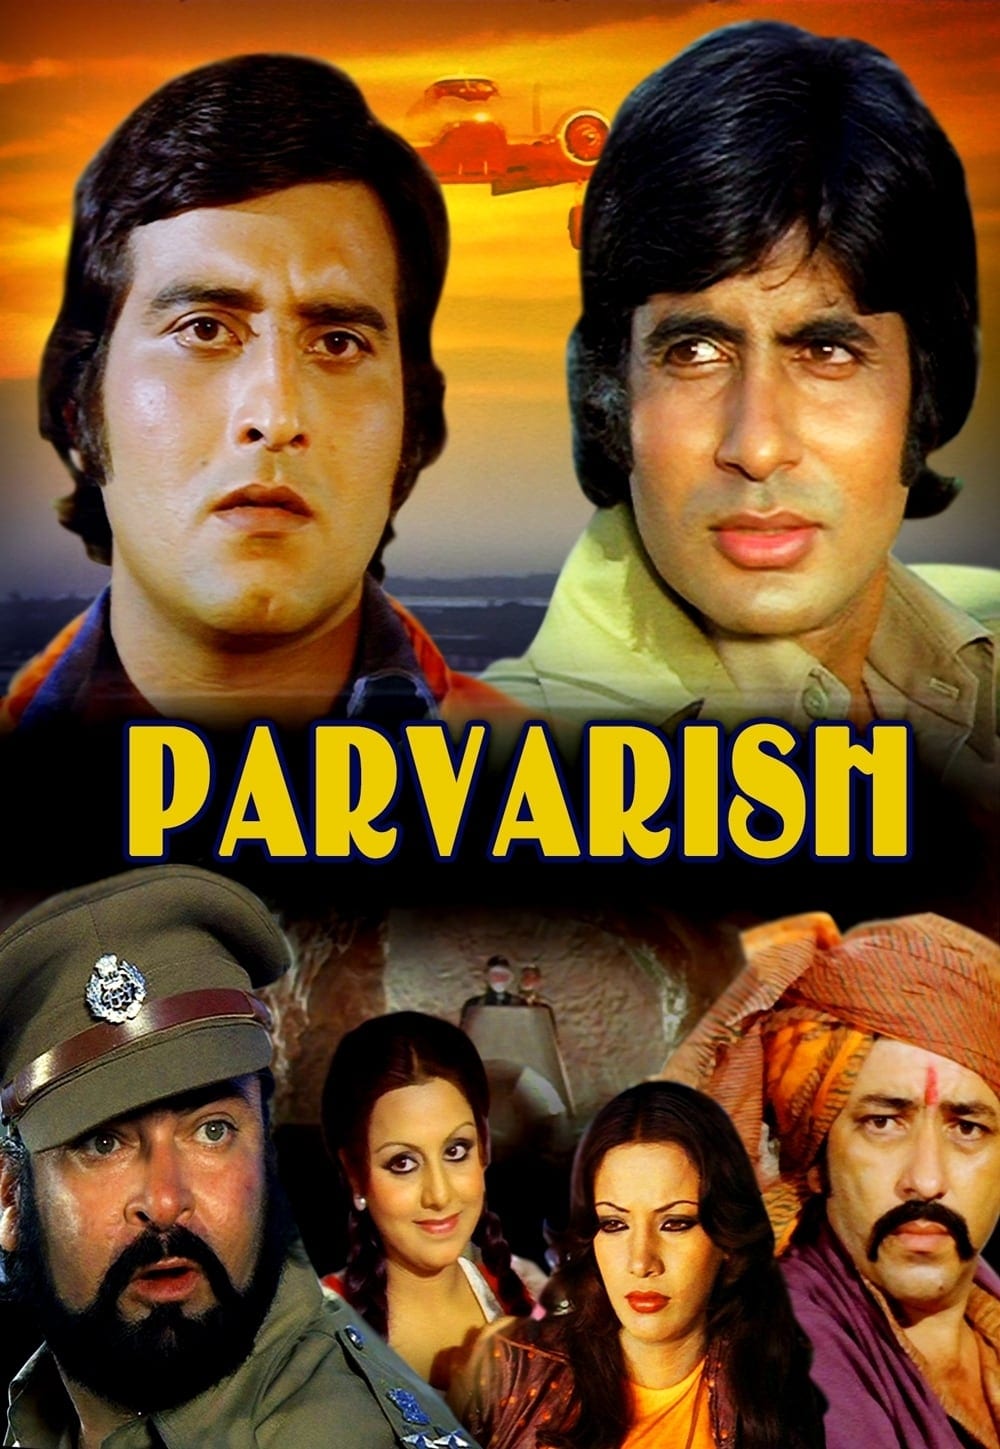 Poster for the movie "Parvarish"